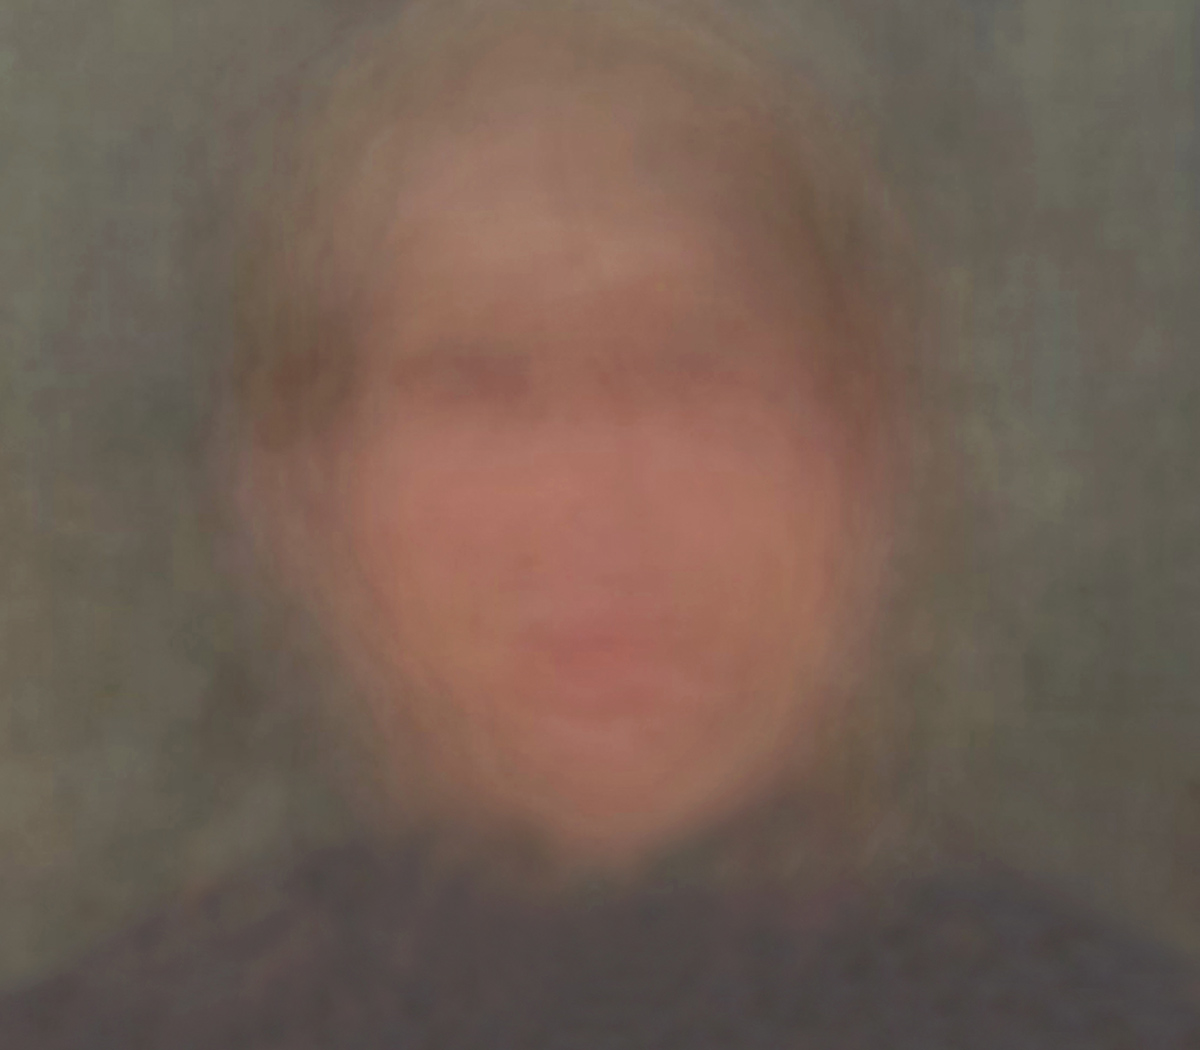 a blurred image of a person